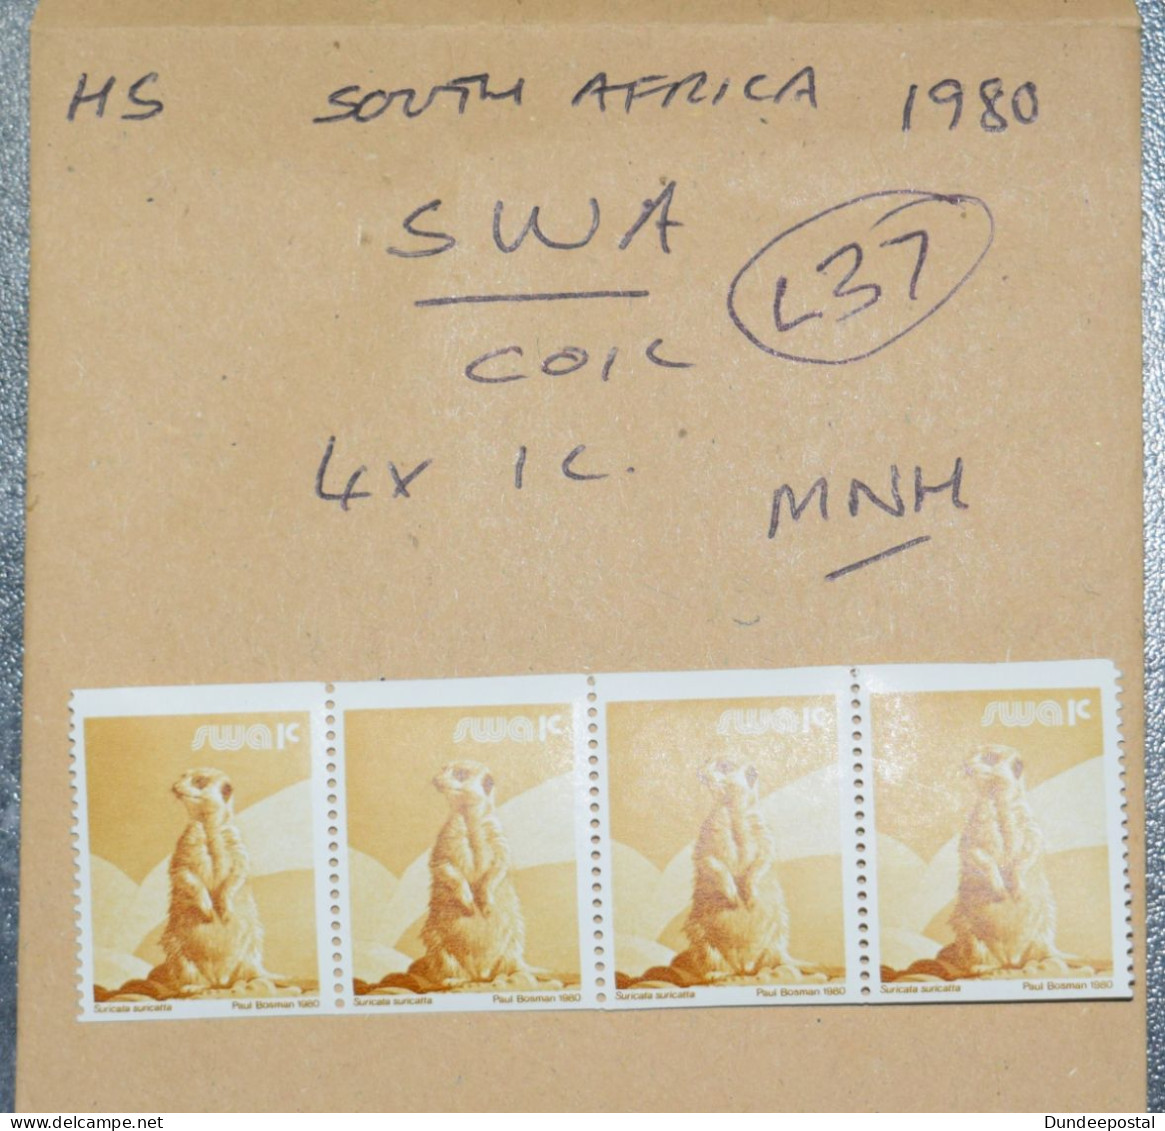 SOUTH AFRICA  STAMPS SWA Coil X 4 MNH  1980  L37  ~~L@@K~~ - Nuovi